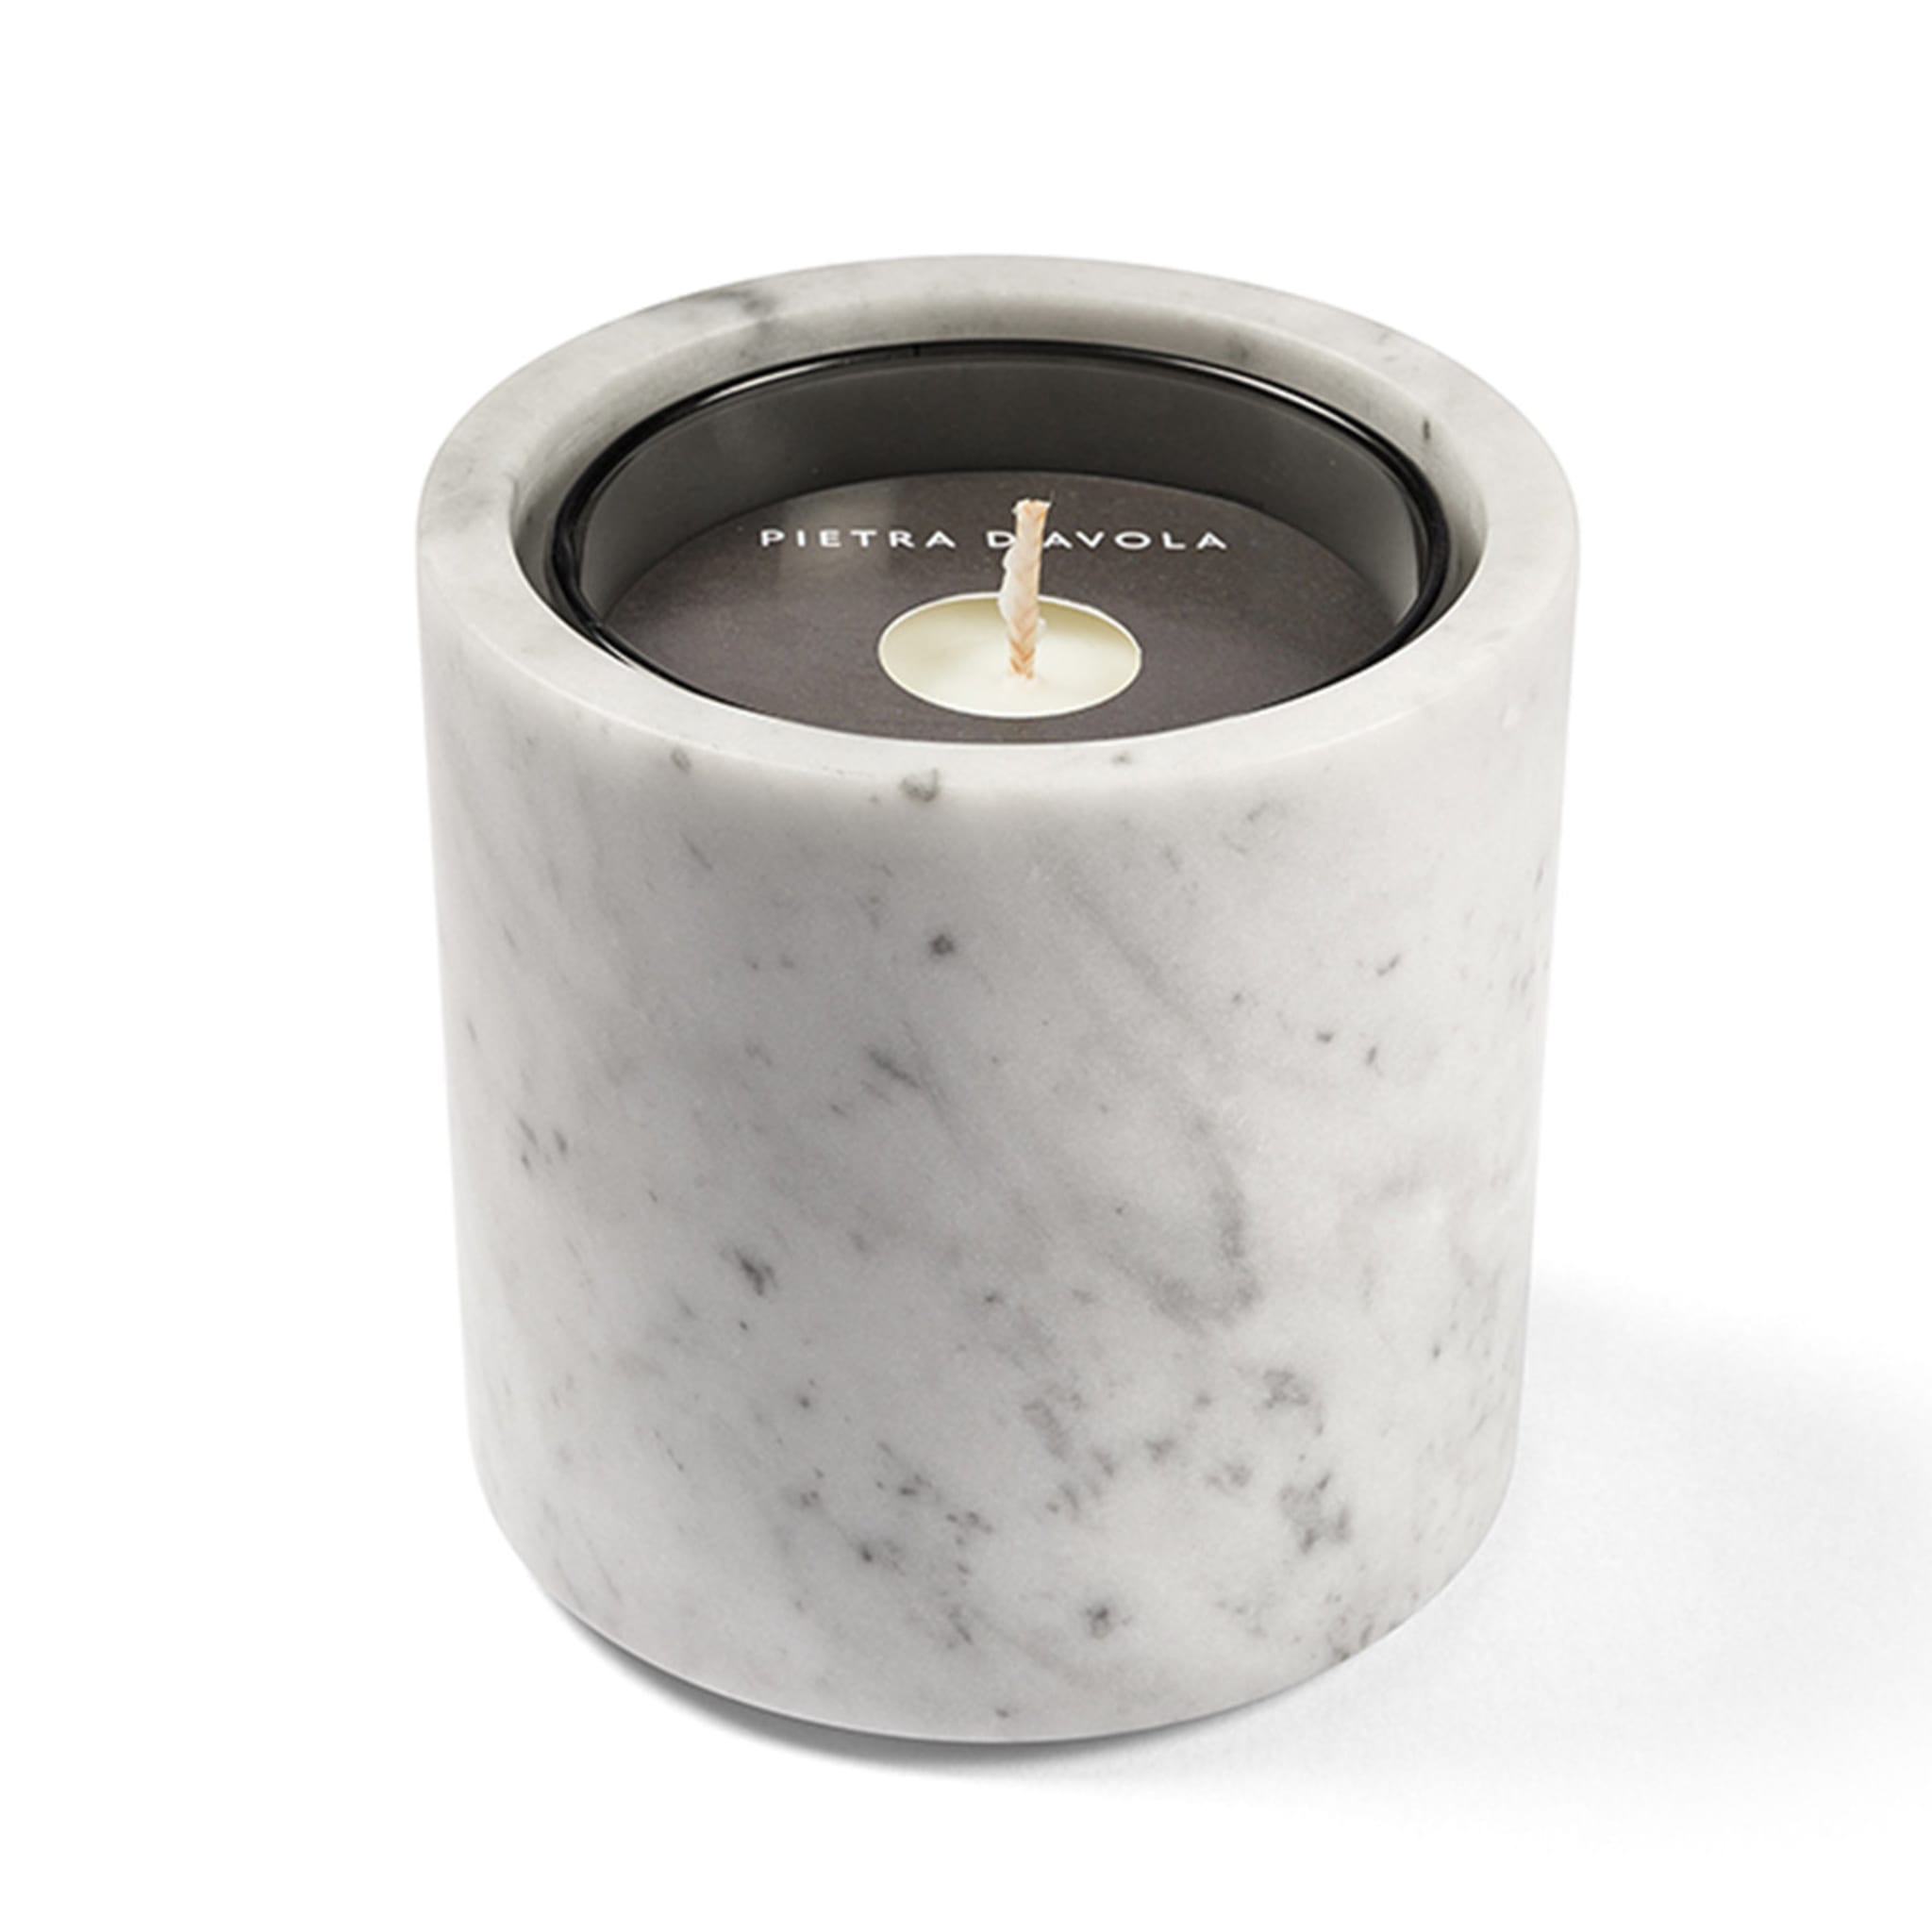 Pietra L11 Candle Holder in Bianco Carrara Marble - Alternative view 2